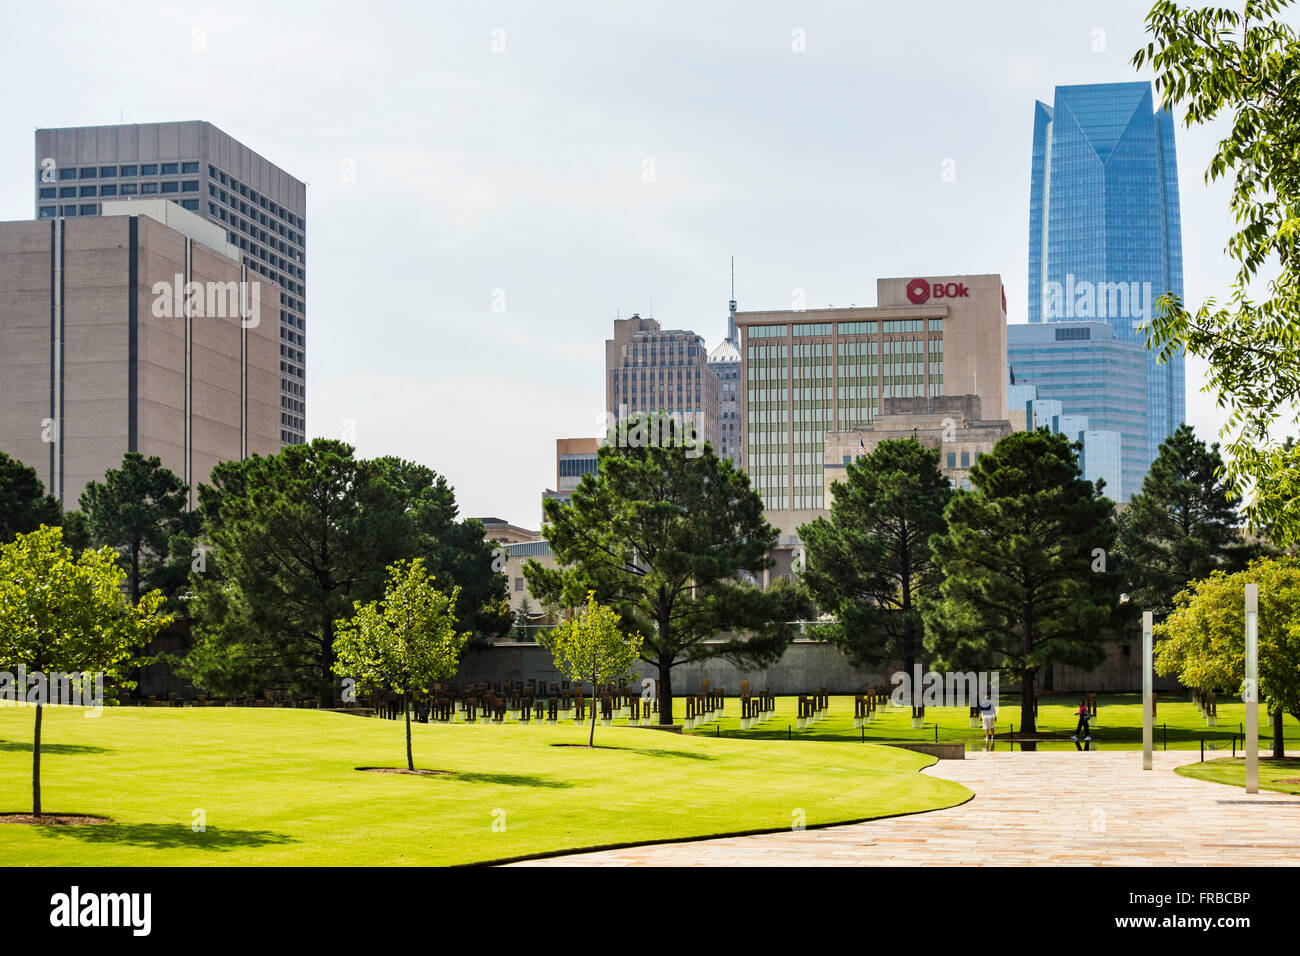 The grounds of the Oklahoma City bombing memorial, showing the Field of Chairs and city buildings. Oklahoma, USA. Stock Photo